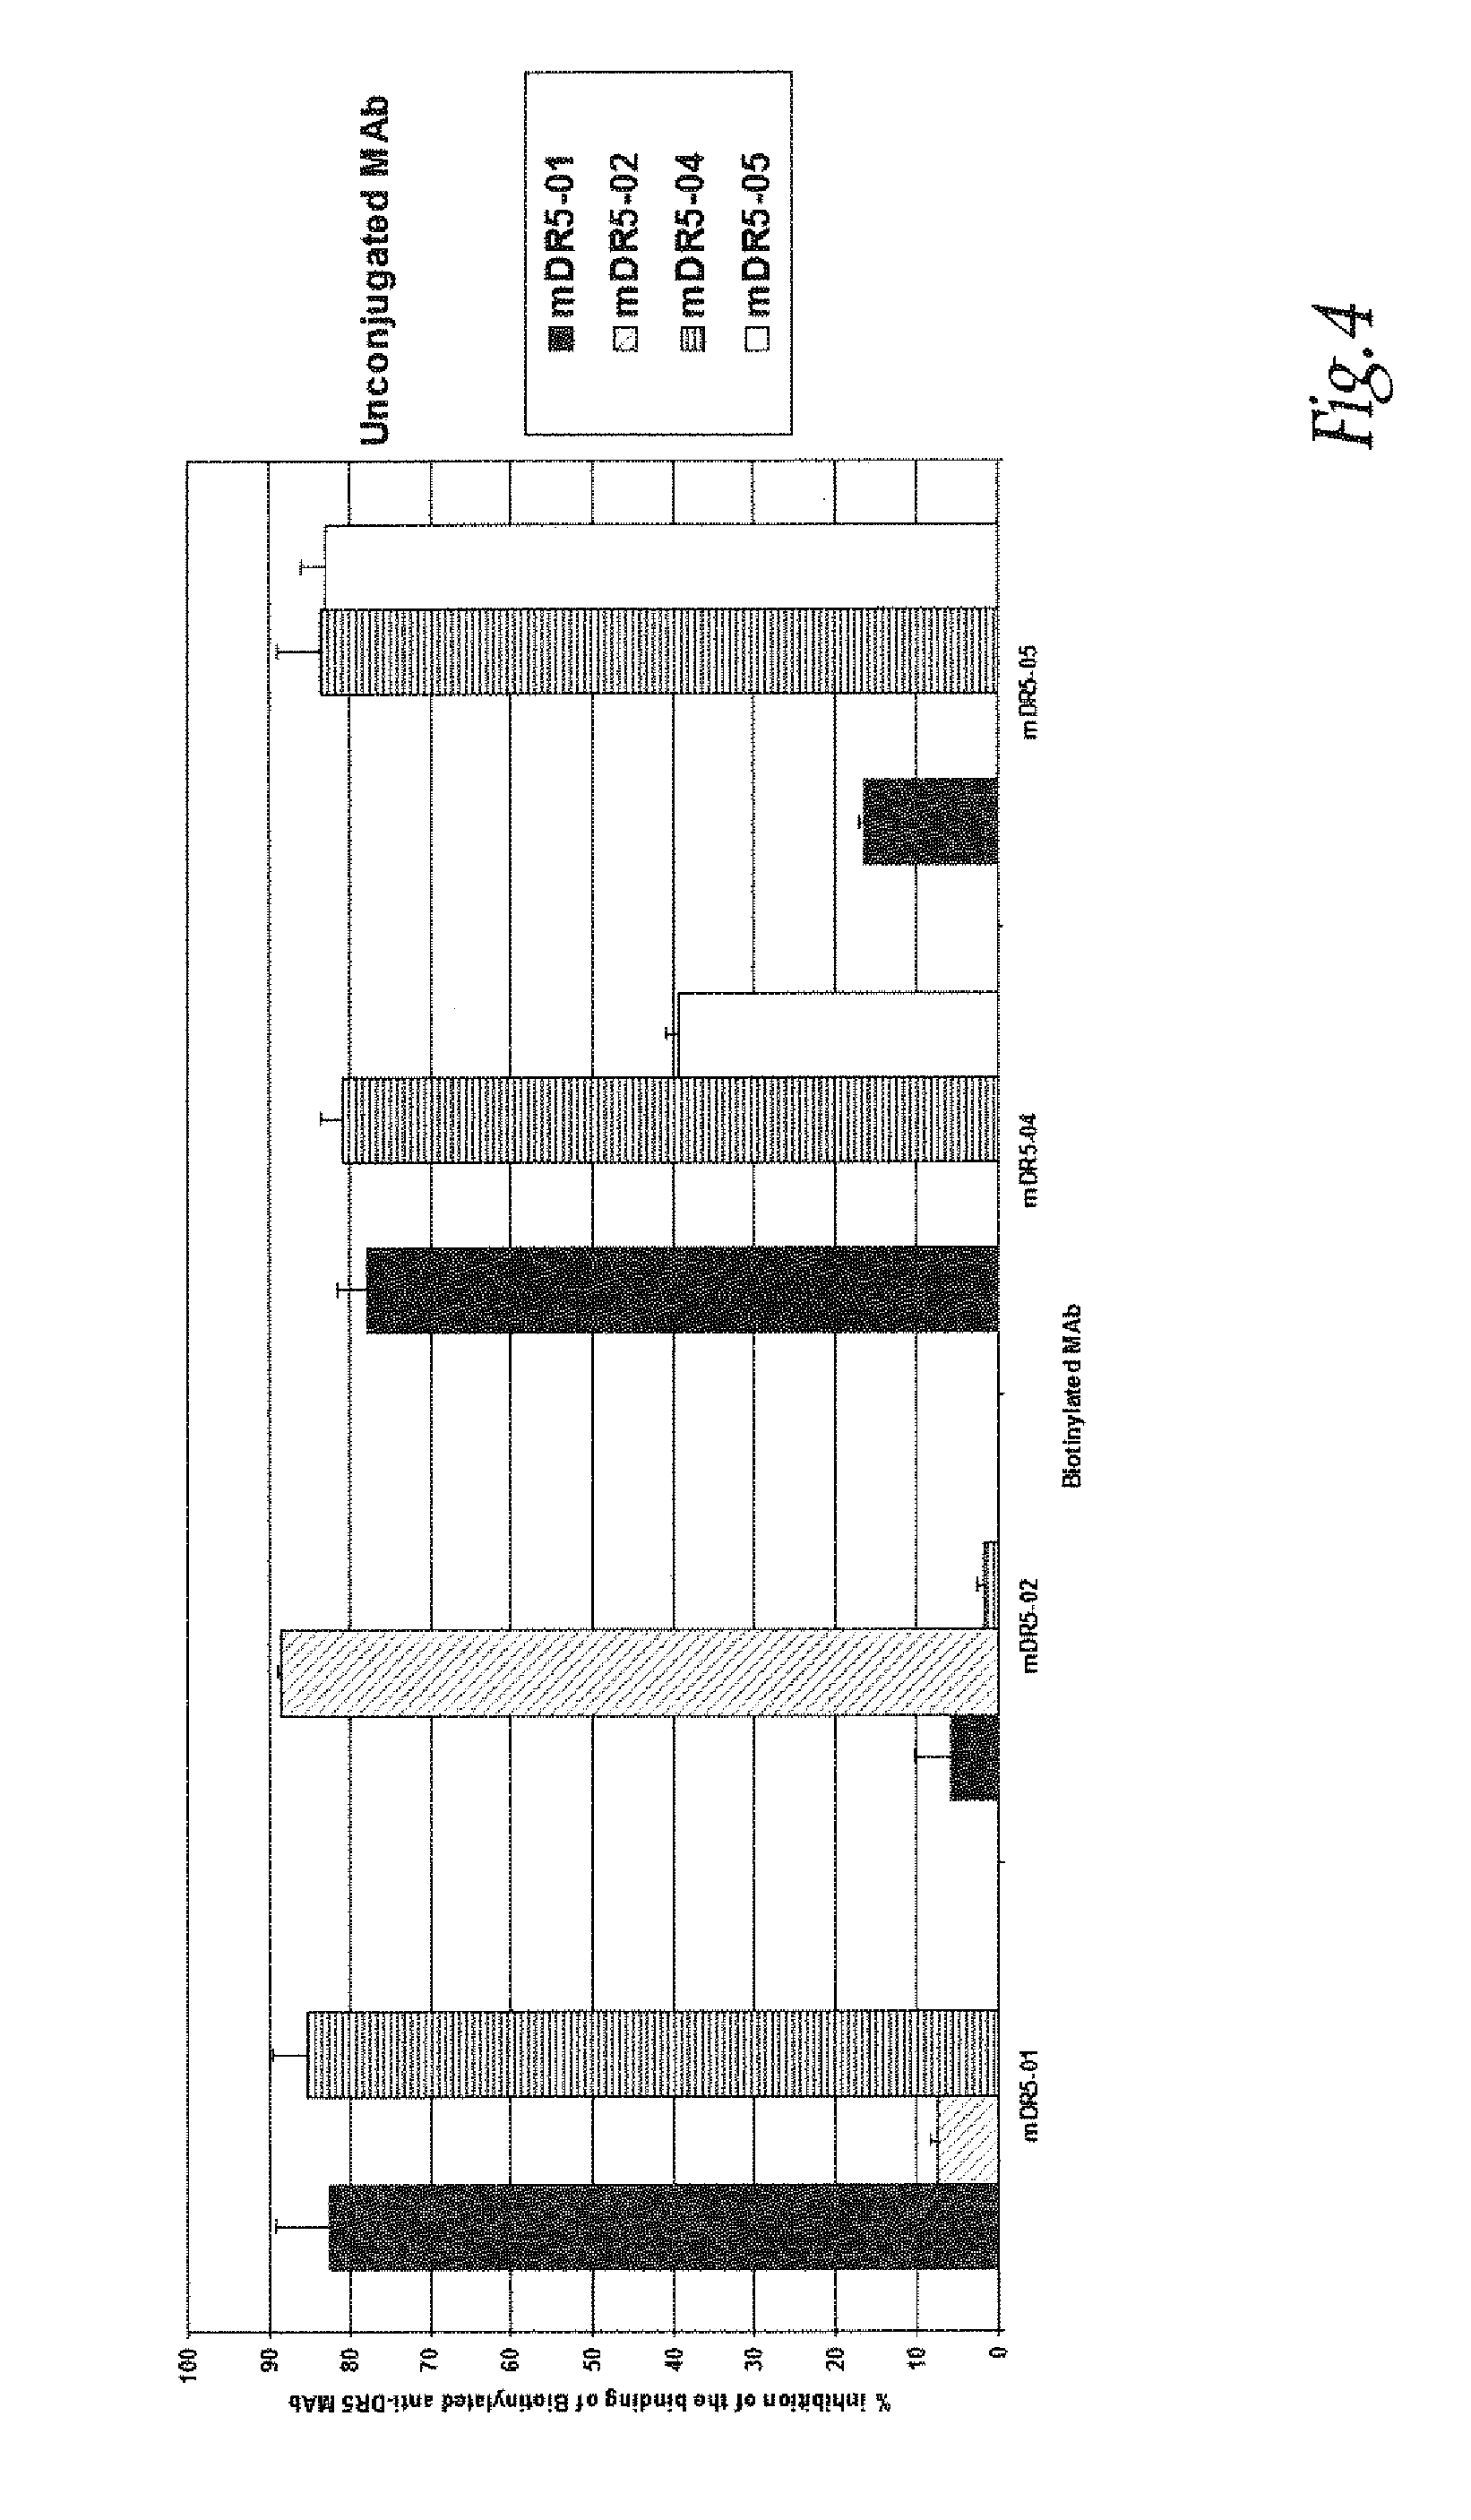 Anti-dr5 family antibodies, bispecific or multivalent Anti-dr5 family antibodies and methods of use thereof